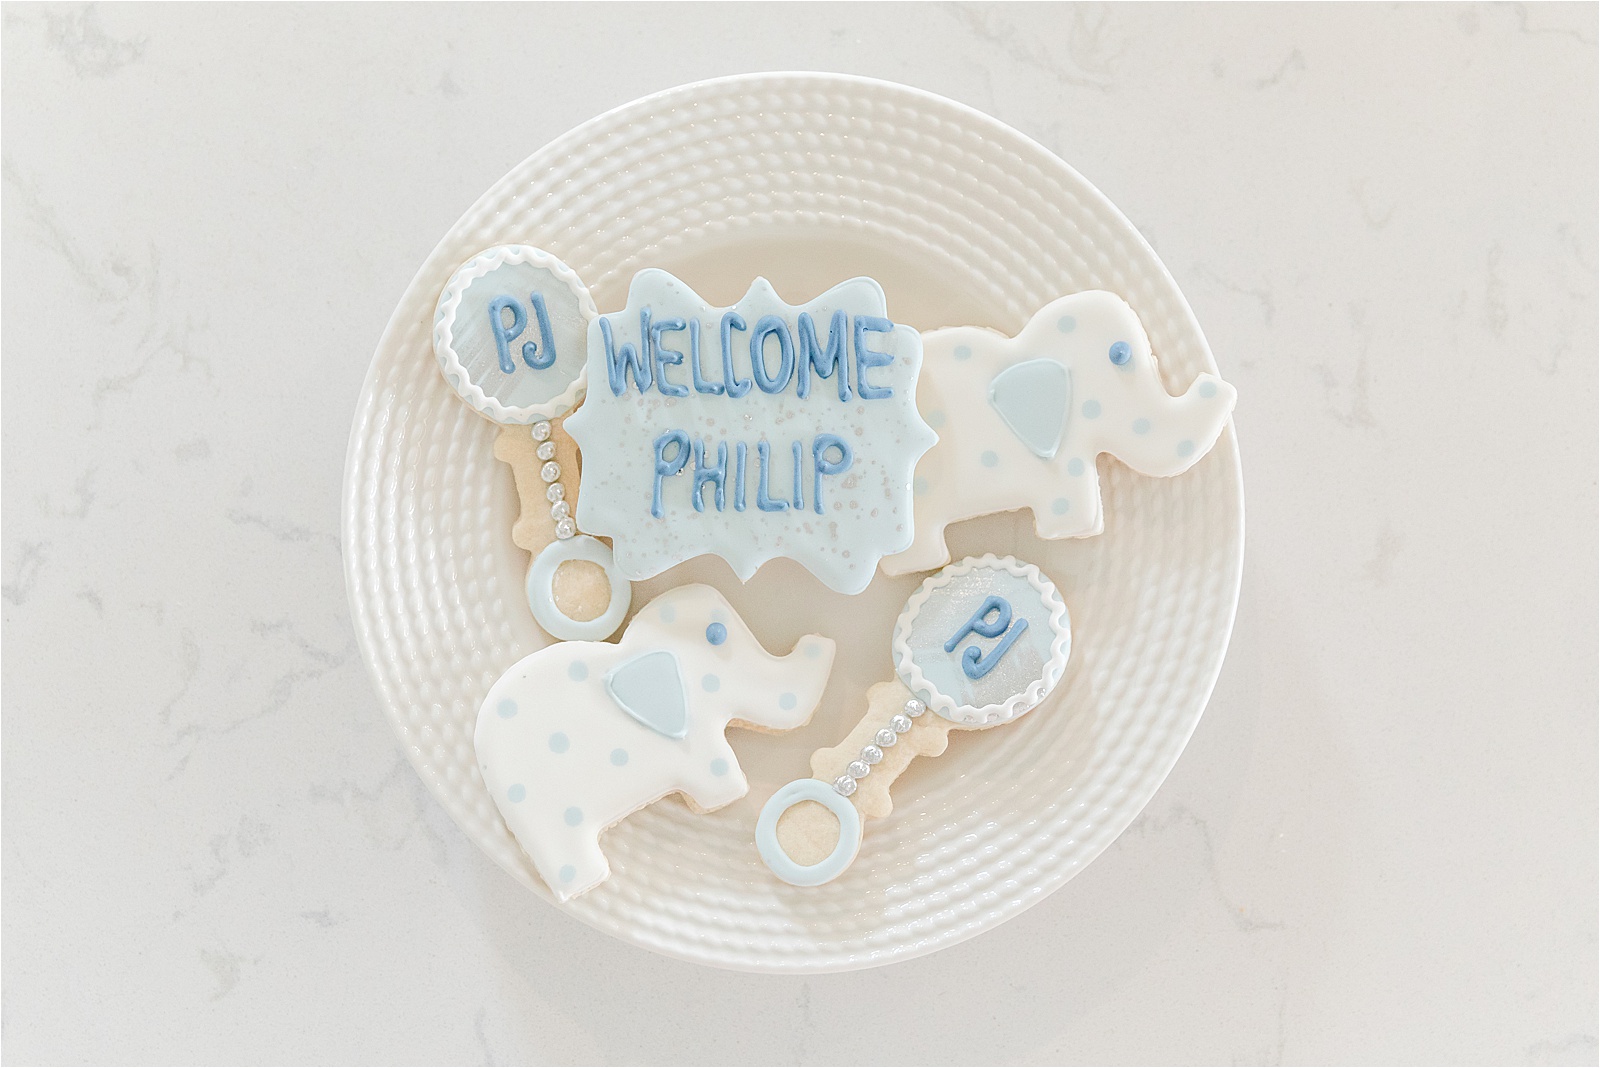 Custom made cookies in the shape of a rattle, elephant, and name plaque for newborn baby boy